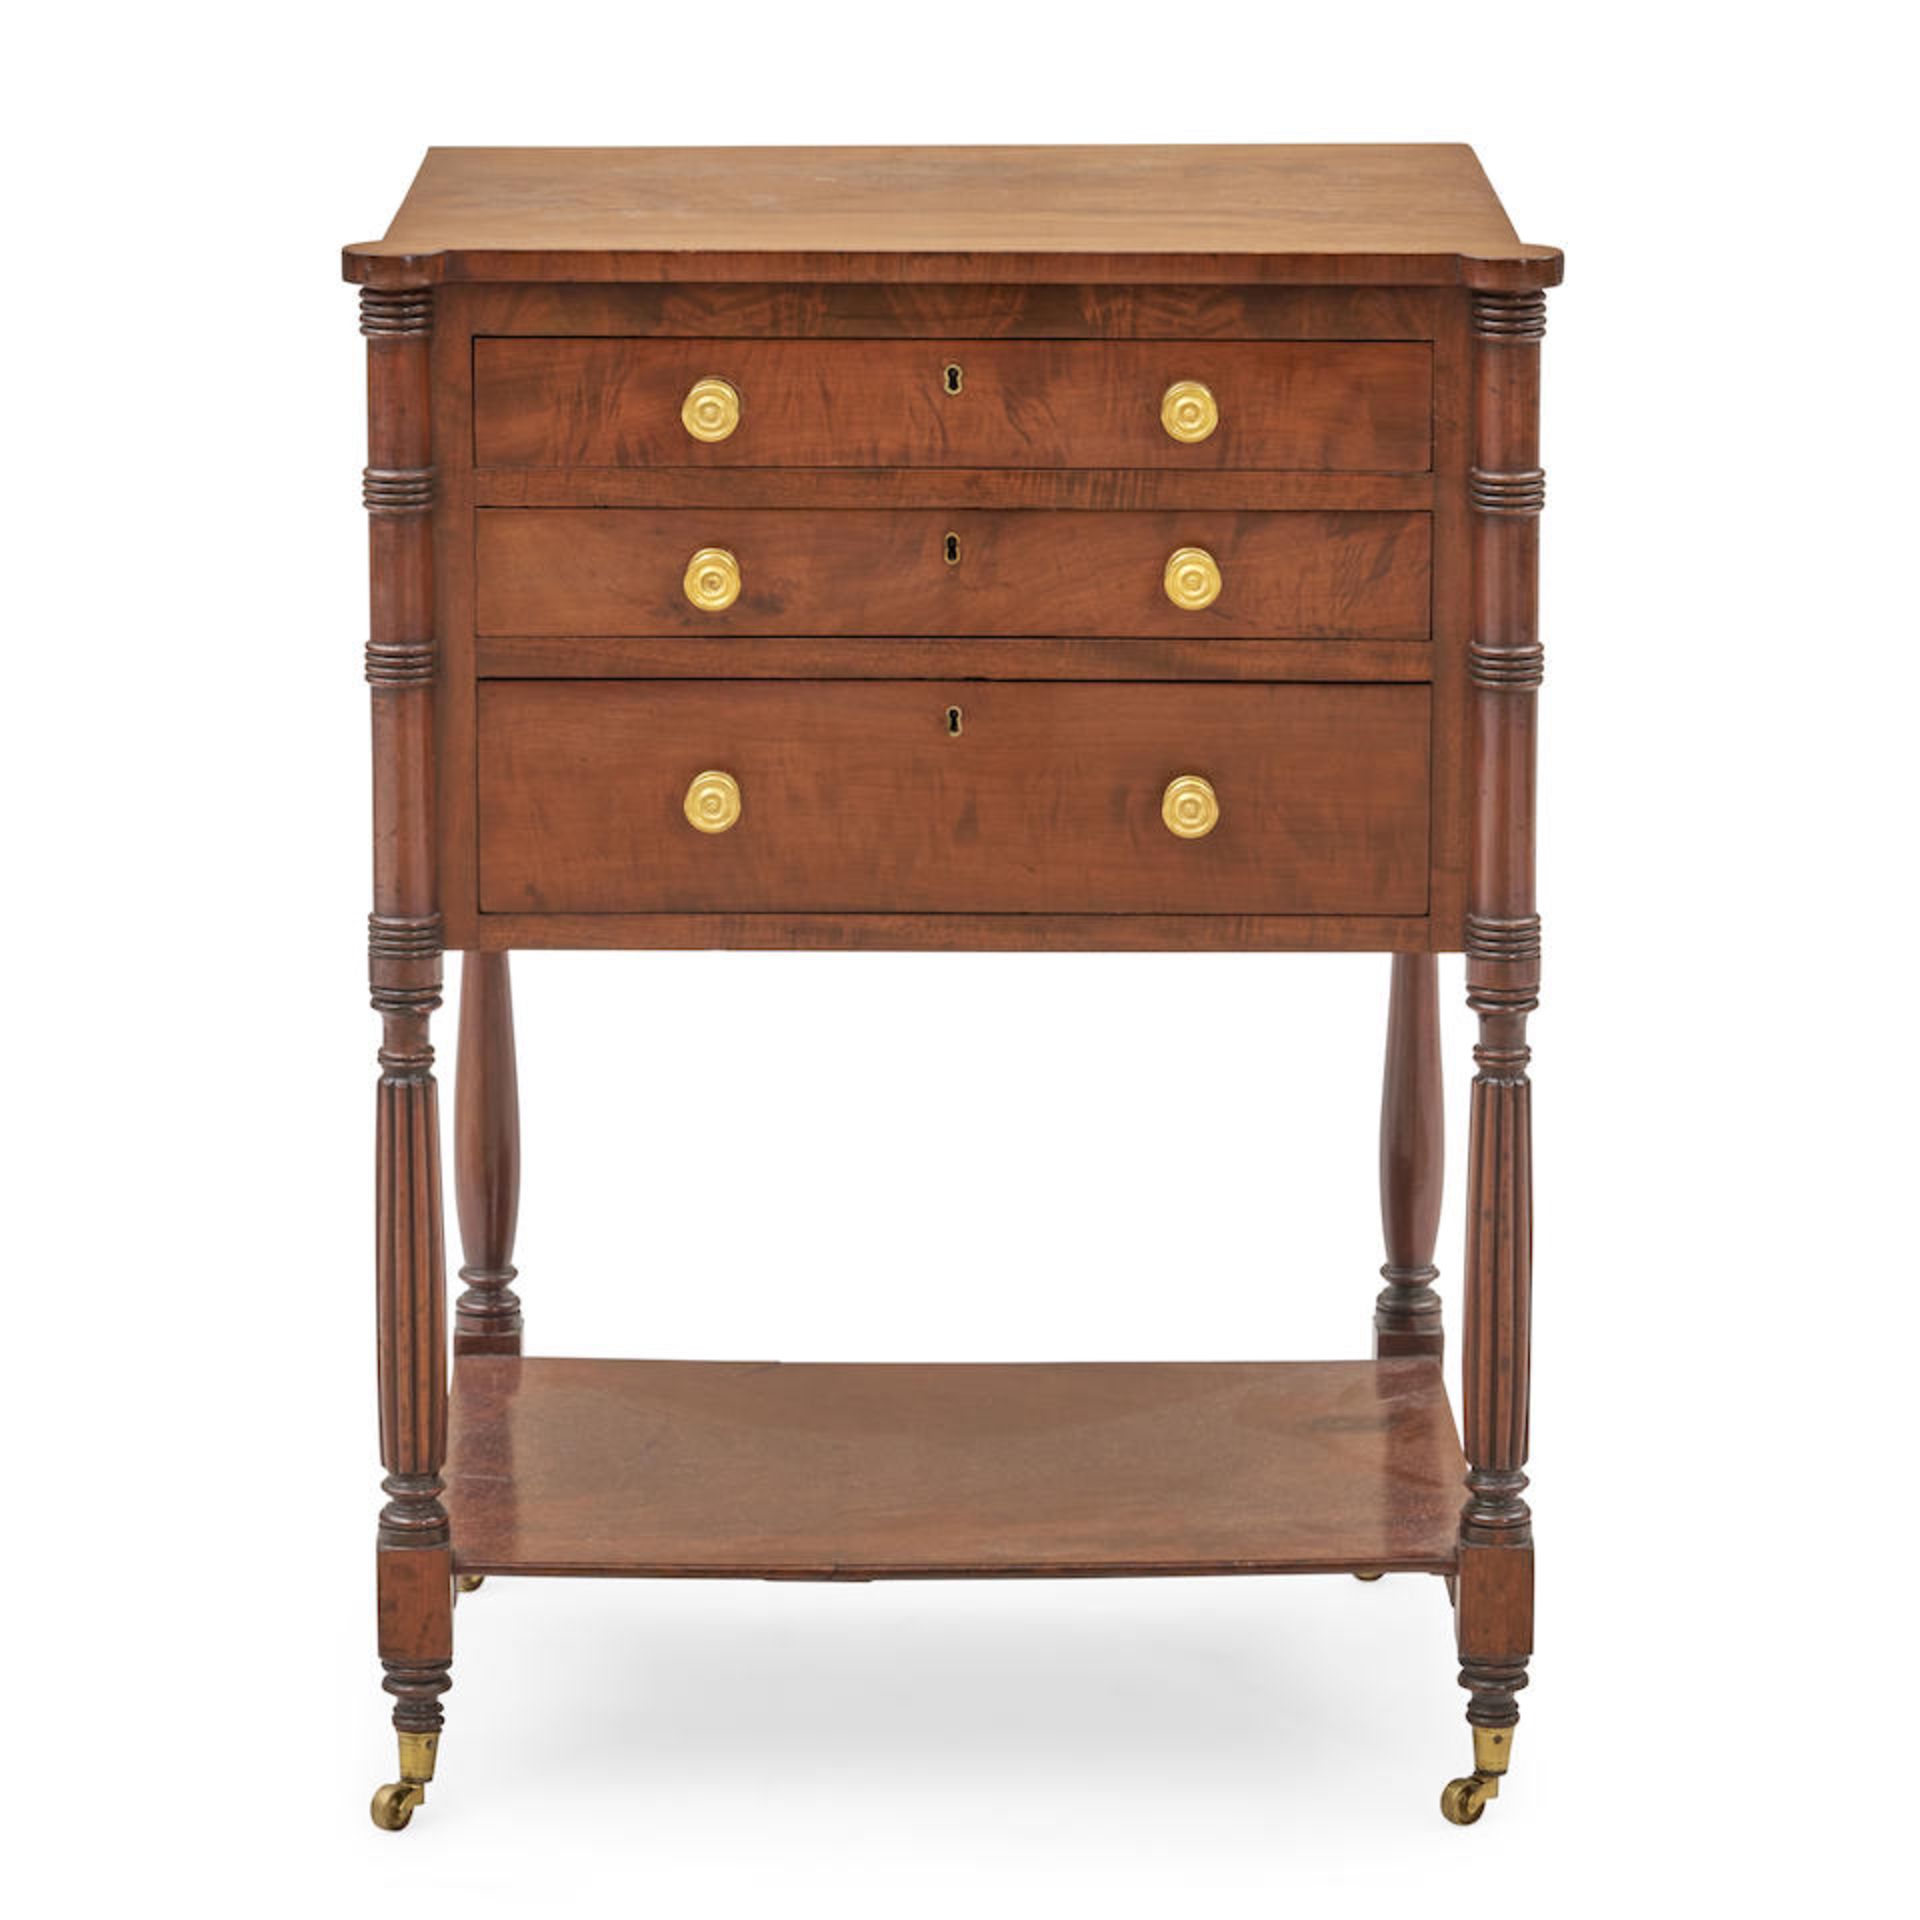 Mahogany and Poplar Writing Table or Chiffonier, probably New York, New York, early 19th century. - Image 2 of 3